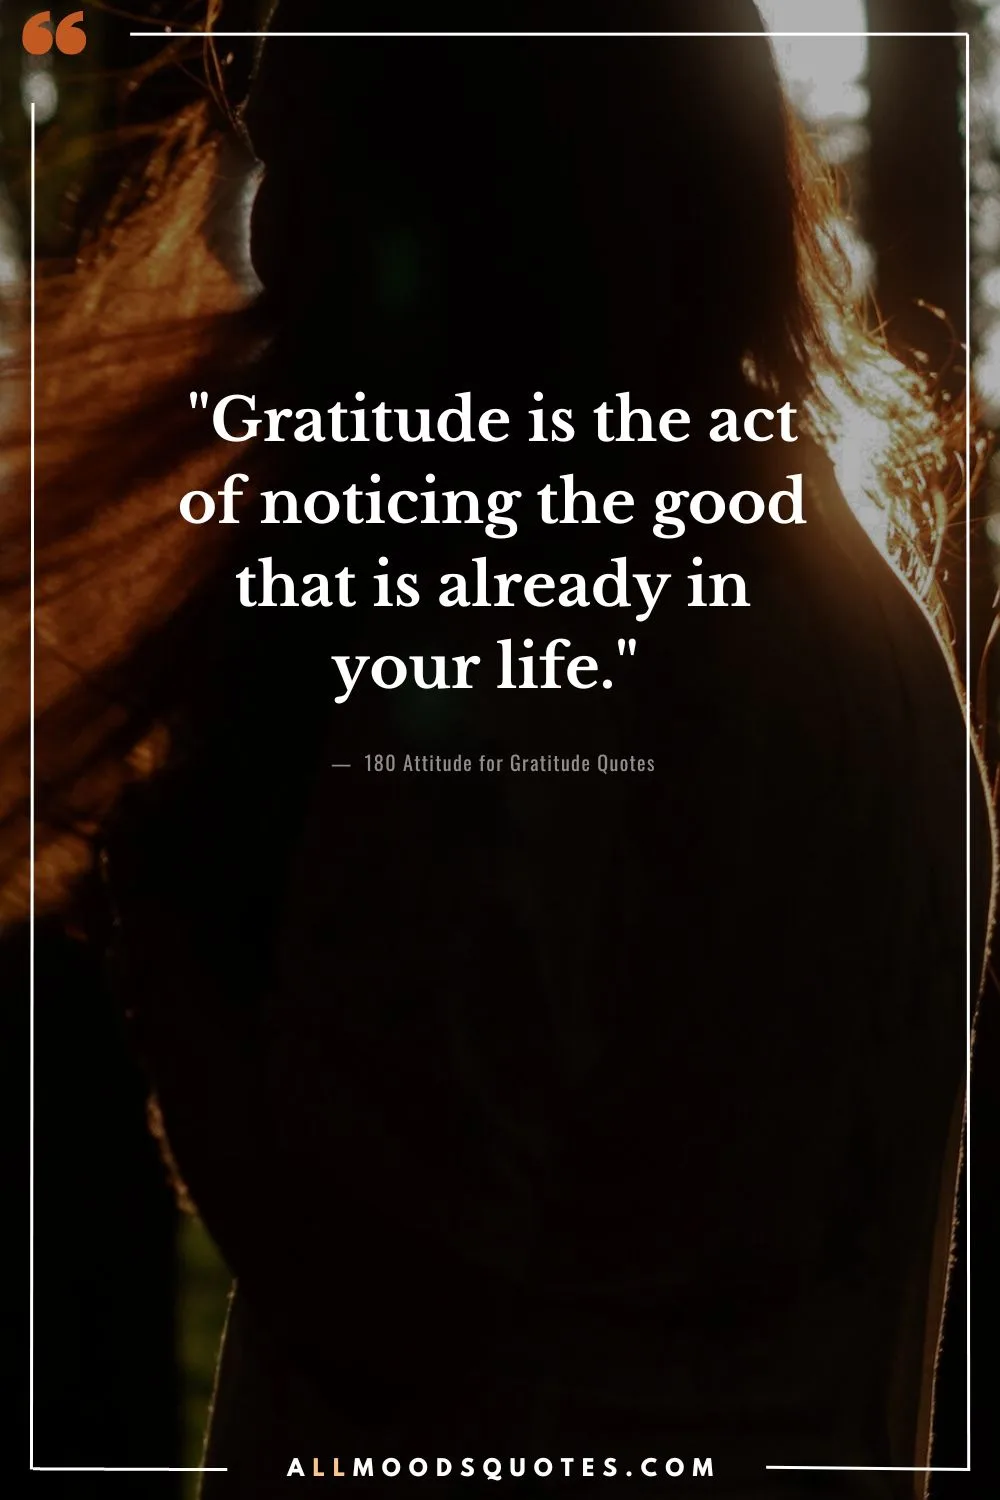 "Gratitude is the act of noticing the good that is already in your life." - Melody Beattie